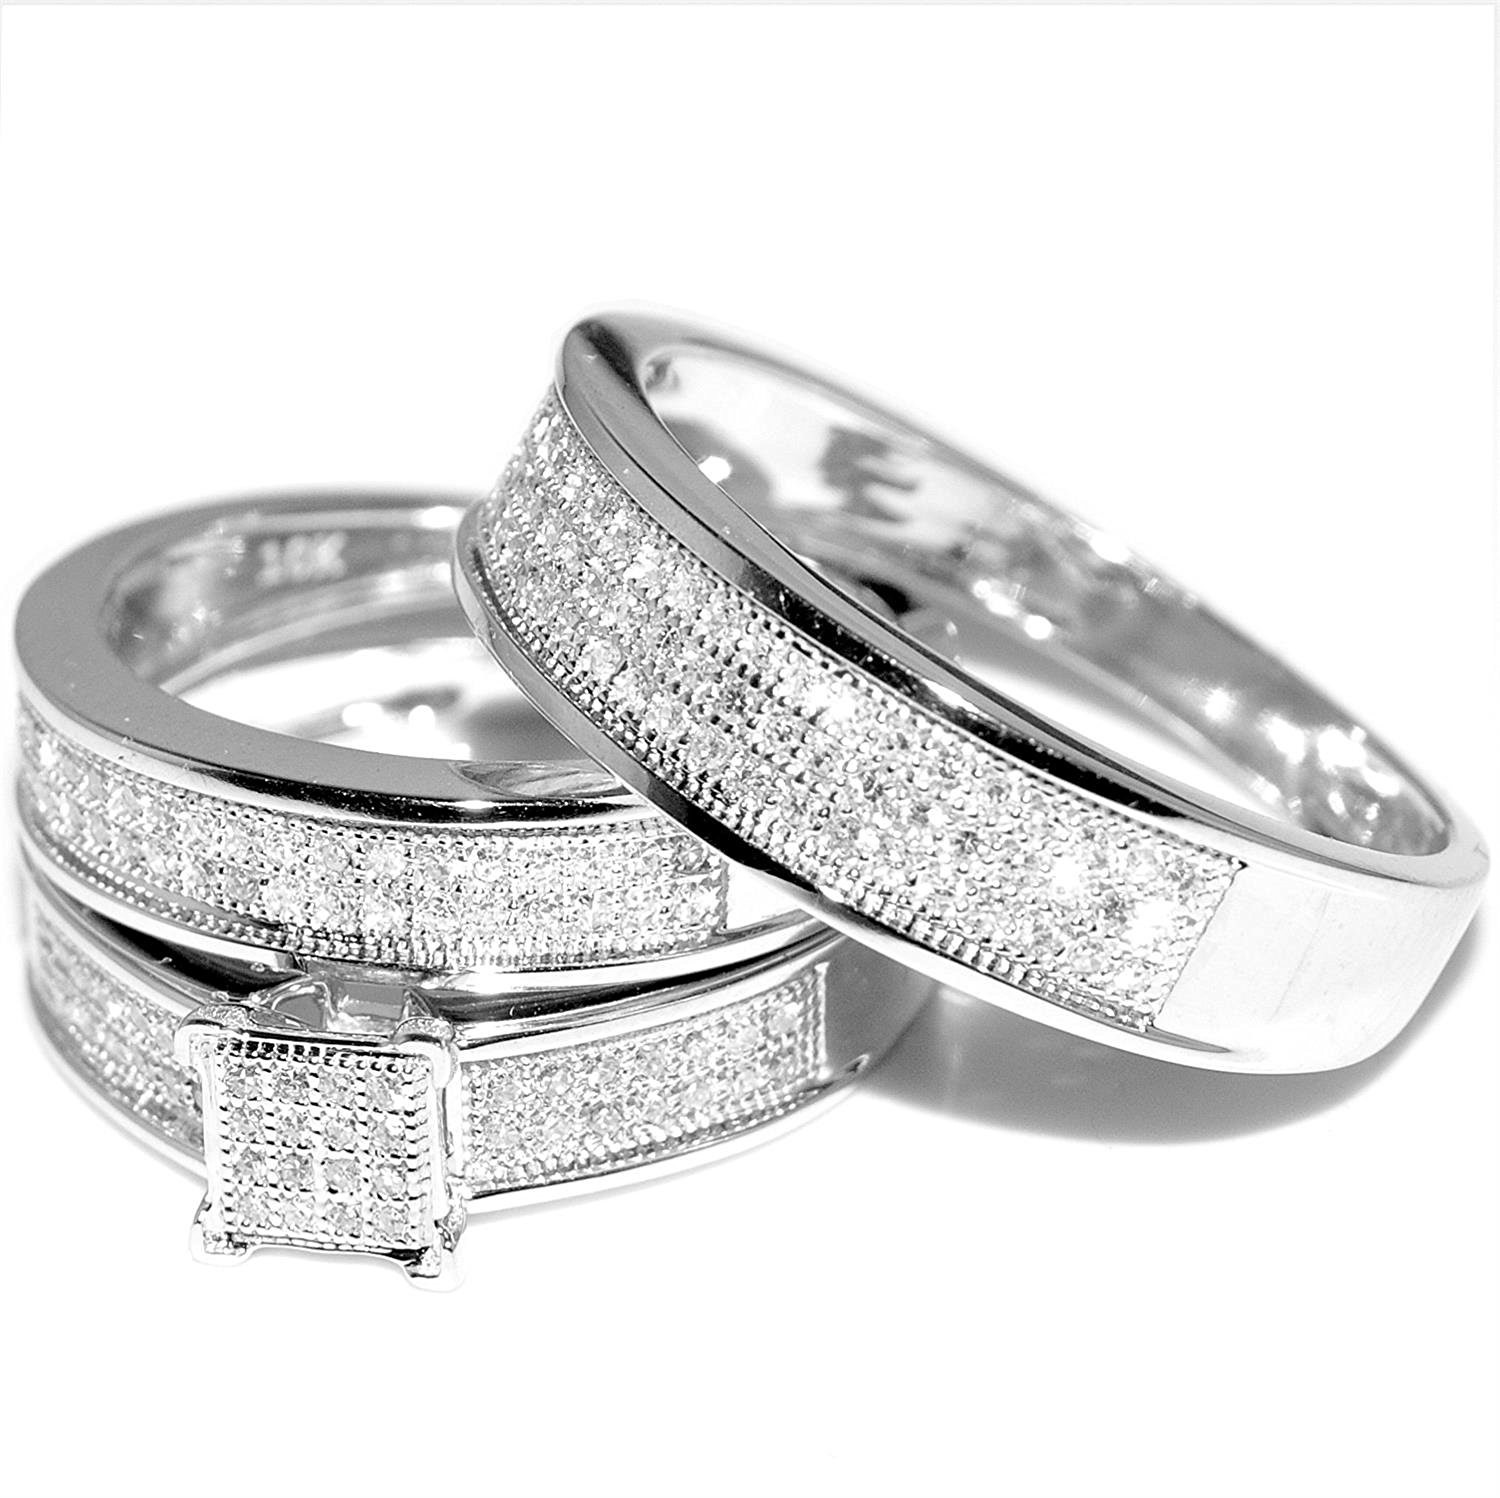 Matching Wedding Bands White Gold
 View Full Gallery of Luxury Cheap Gold Wedding Bands for